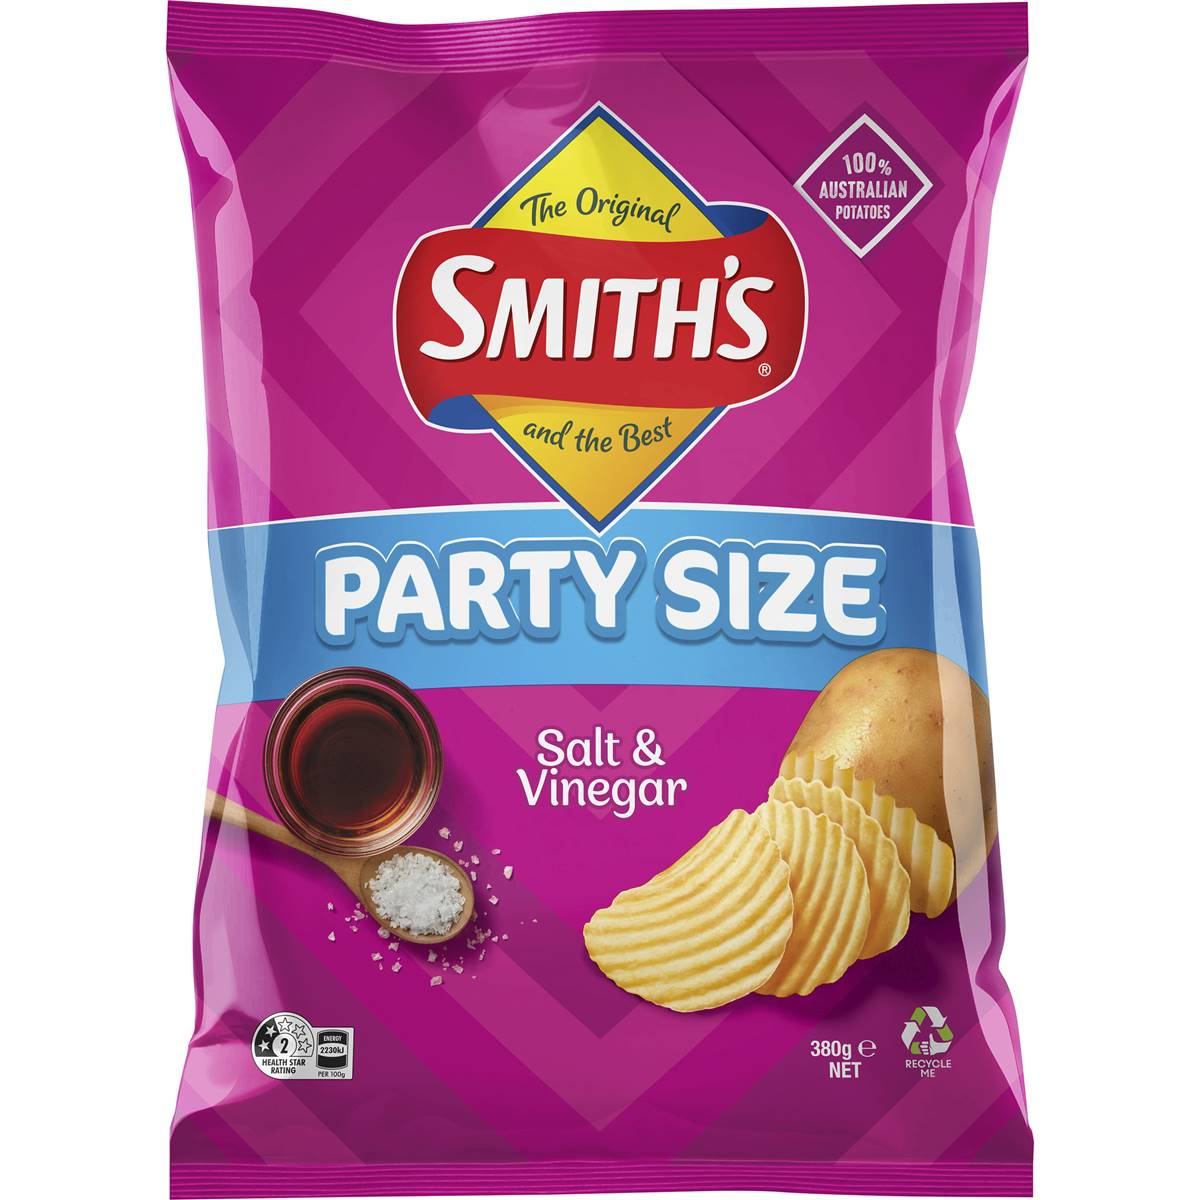 Calories in Smith's Crinkle Cut Chips Salt & Vinegar Party Size